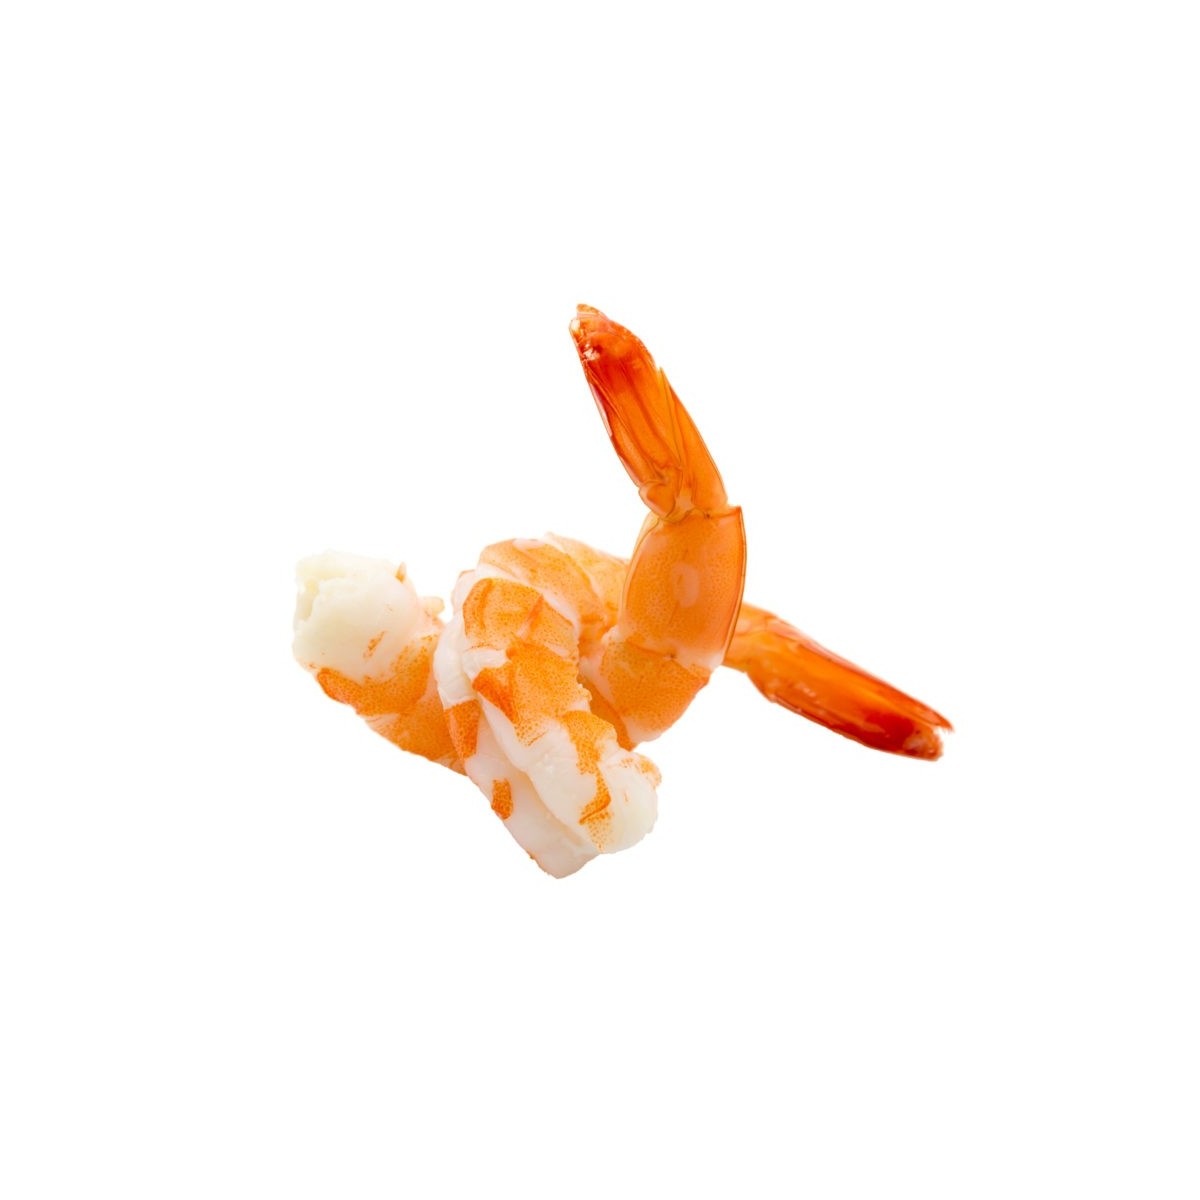 DECORTICATED SHRIMPS 16/20 IQF 10 X 1KG (GROSS WEIGHT)  BAG 